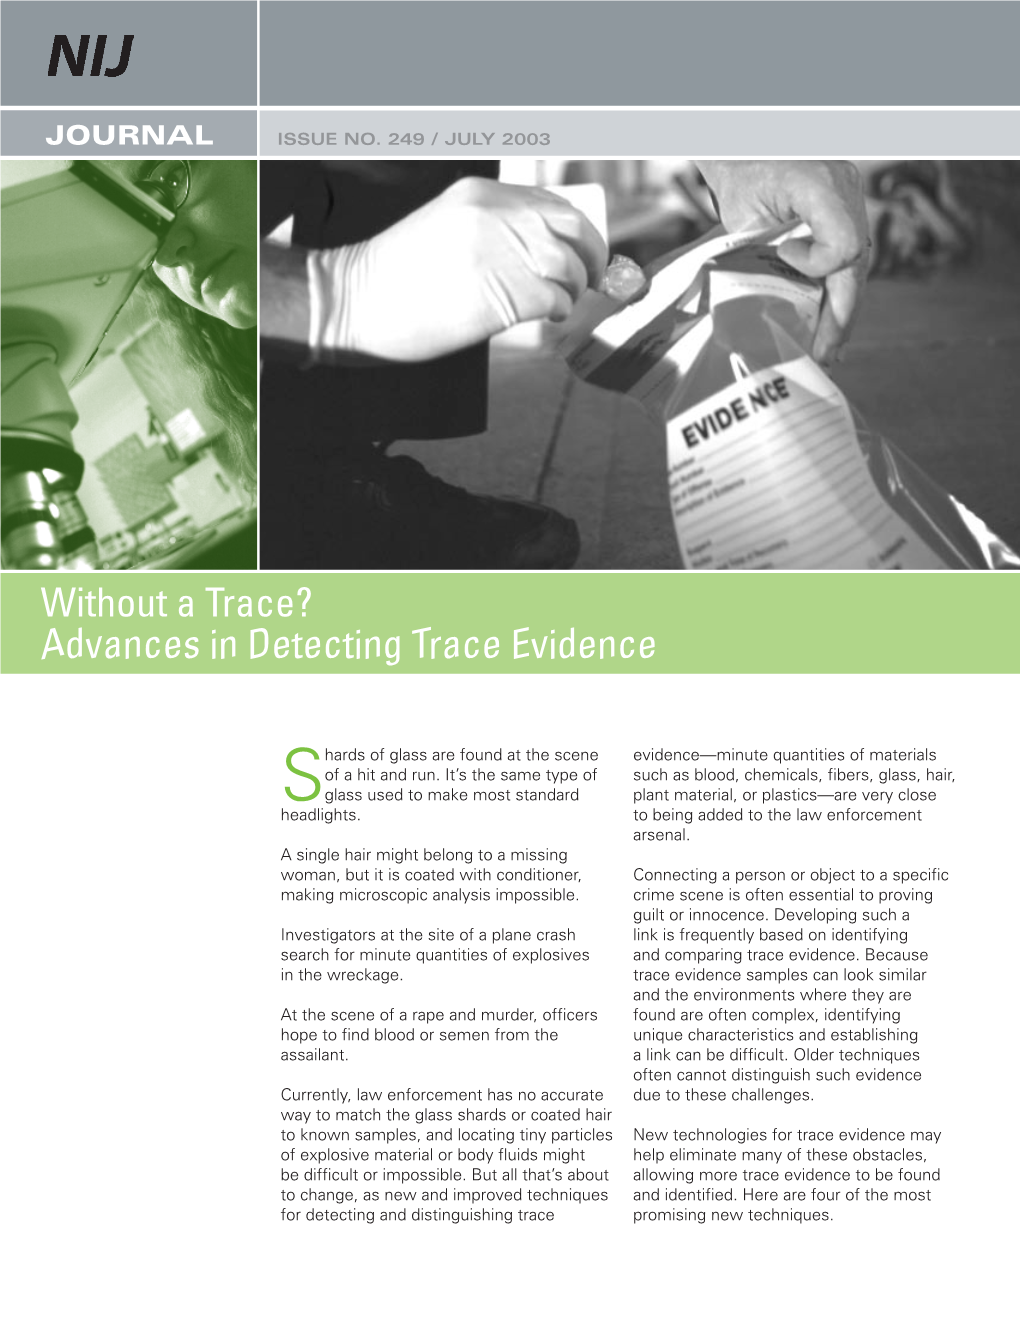 Advances in Detecting Trace Evidence